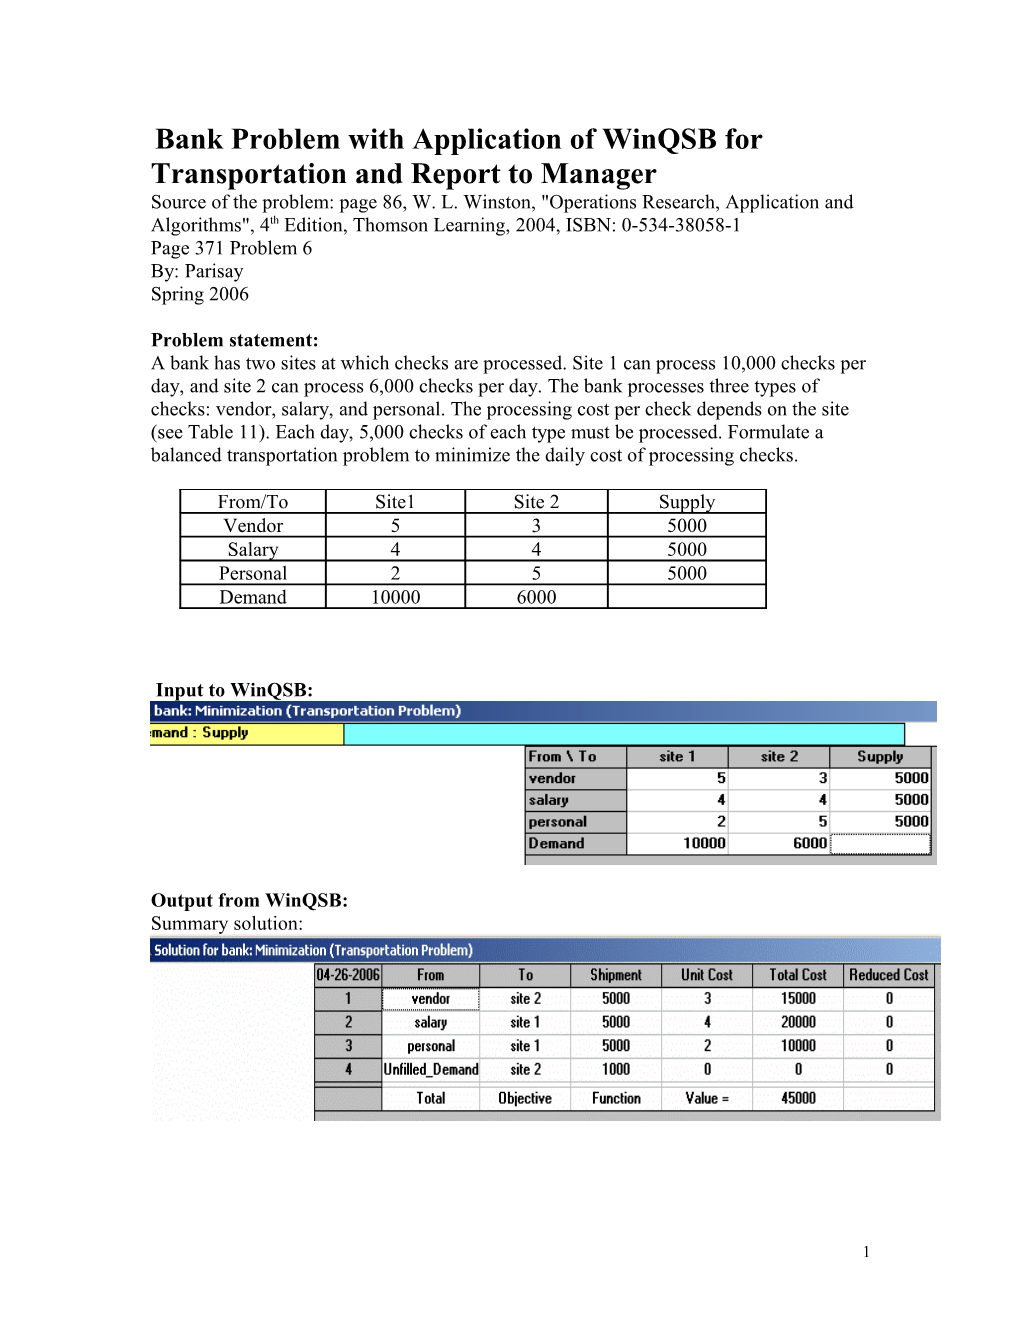 Bank Problem with Application of Winqsb for Transportationand Report to Manager